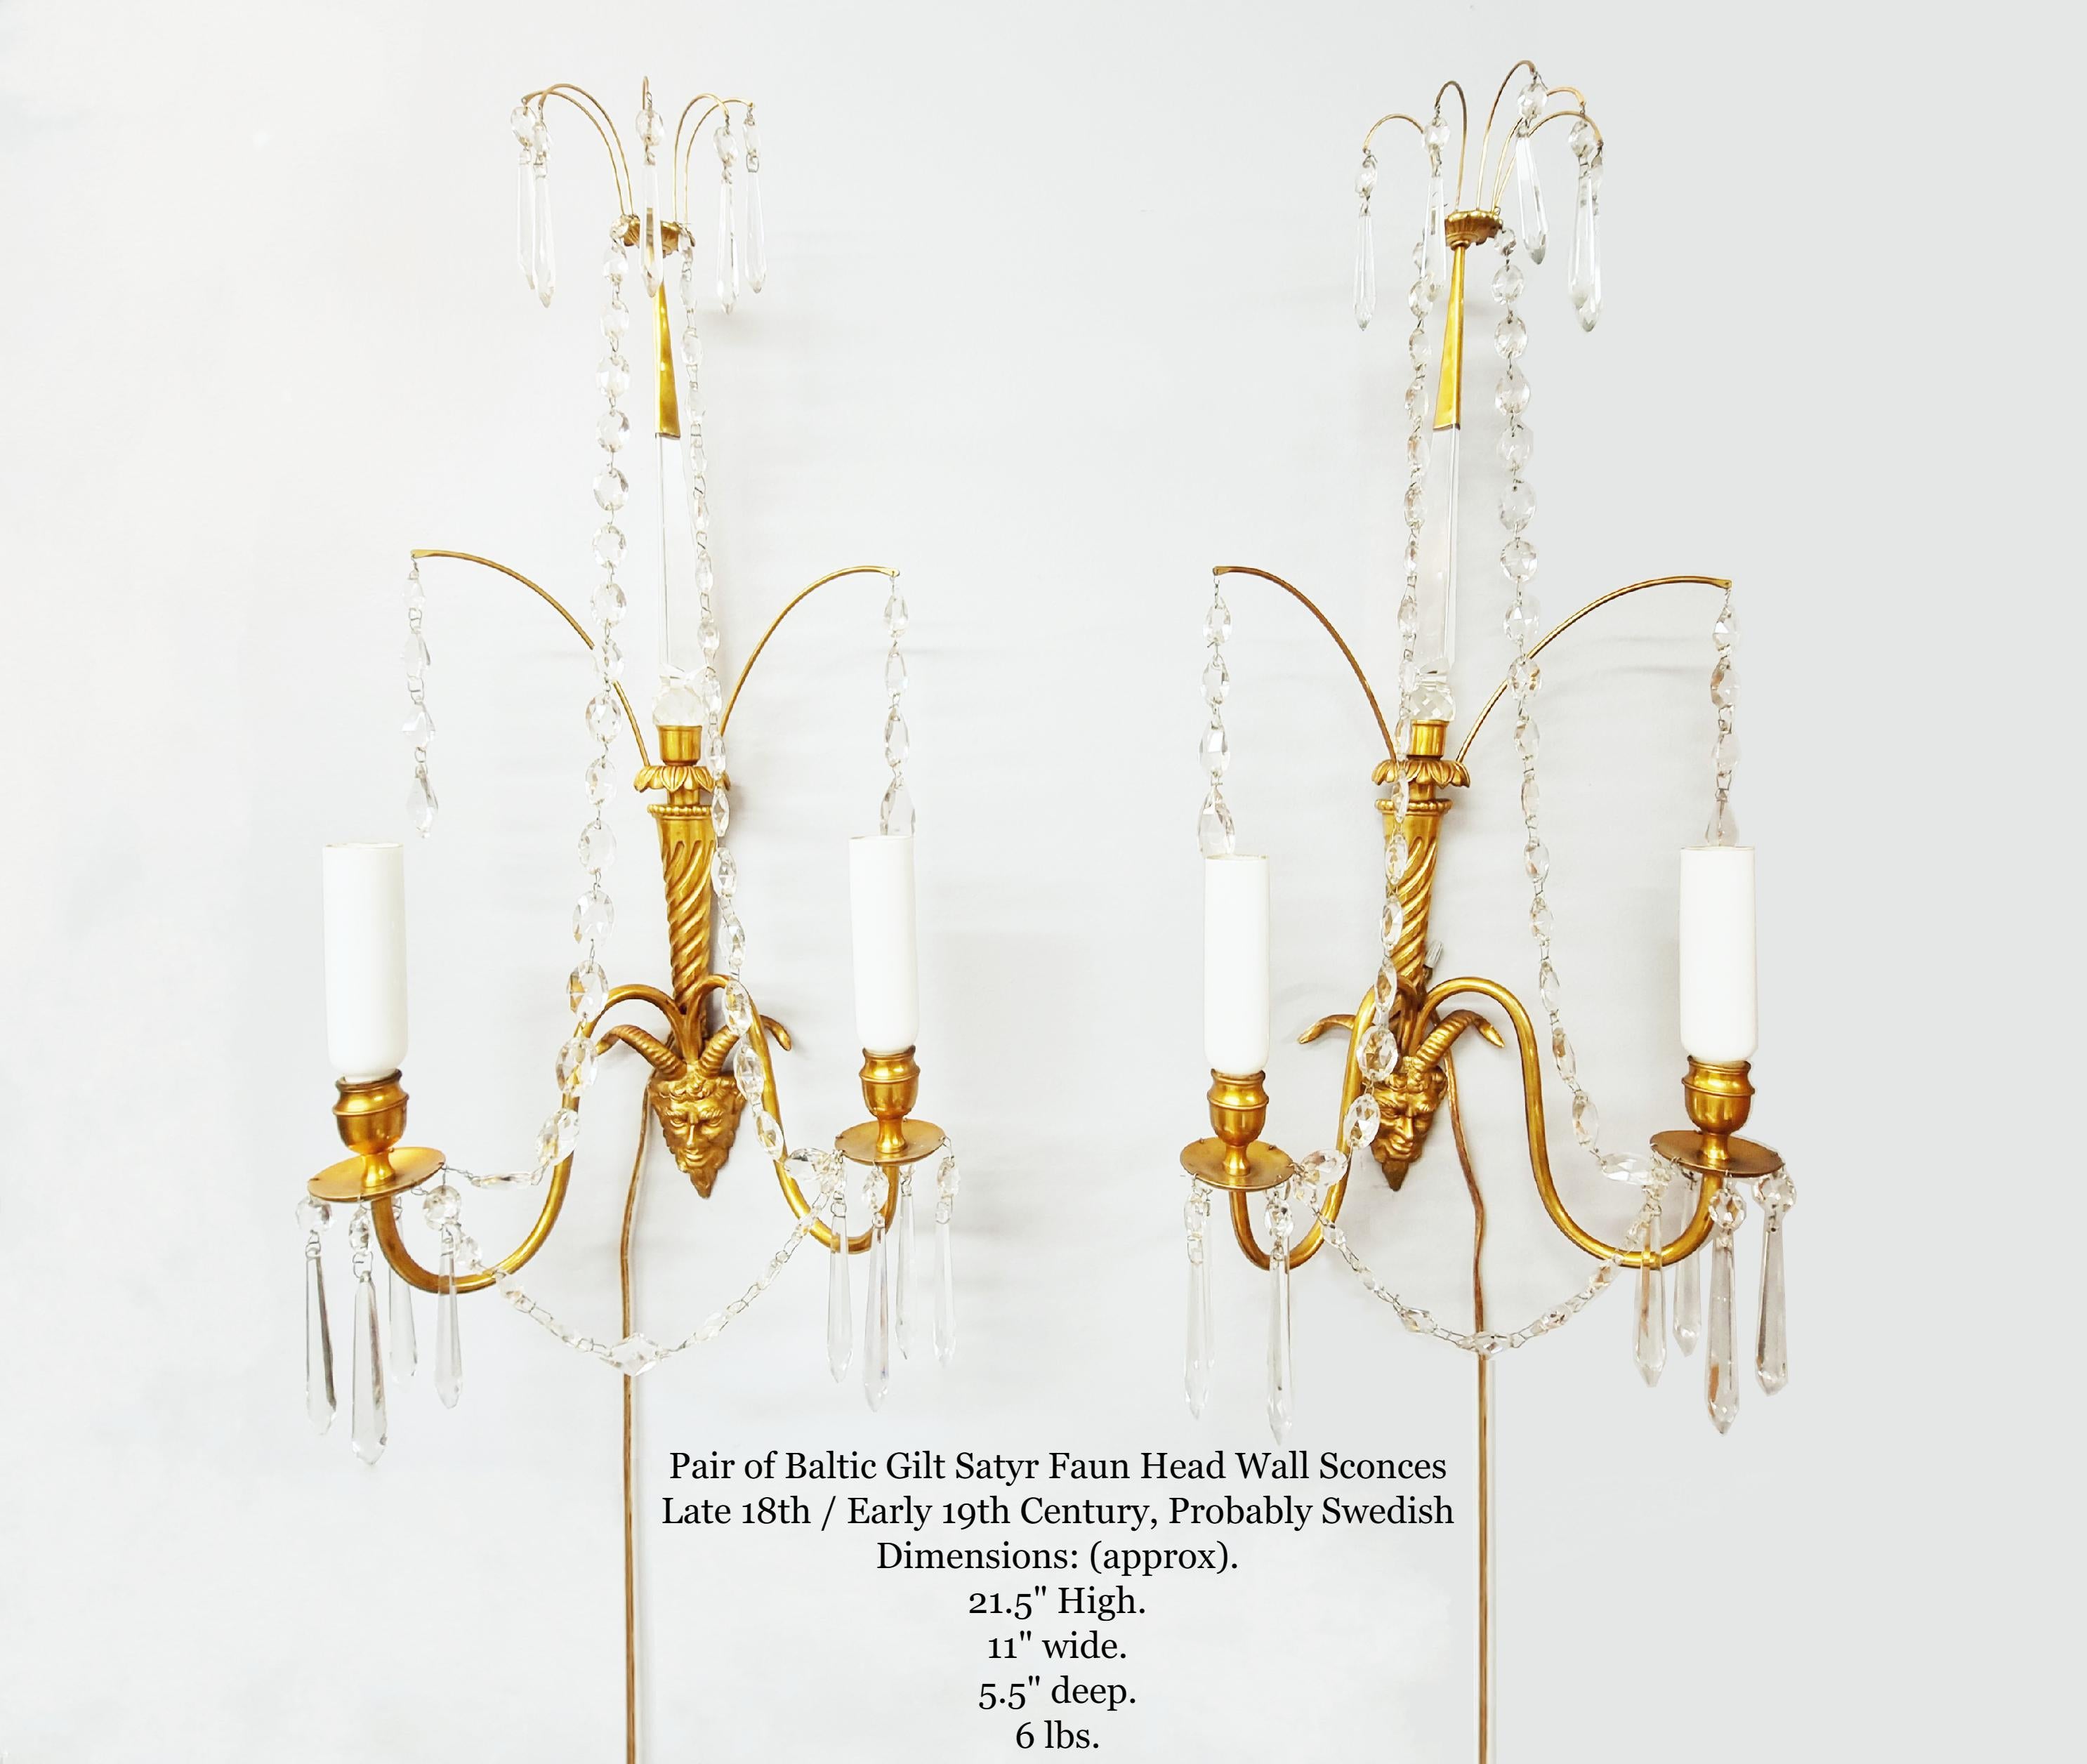 Pair of Baltic Gilt Satyr Faun Head Wall Sconces, Late 19th / Early 20th Century For Sale 9